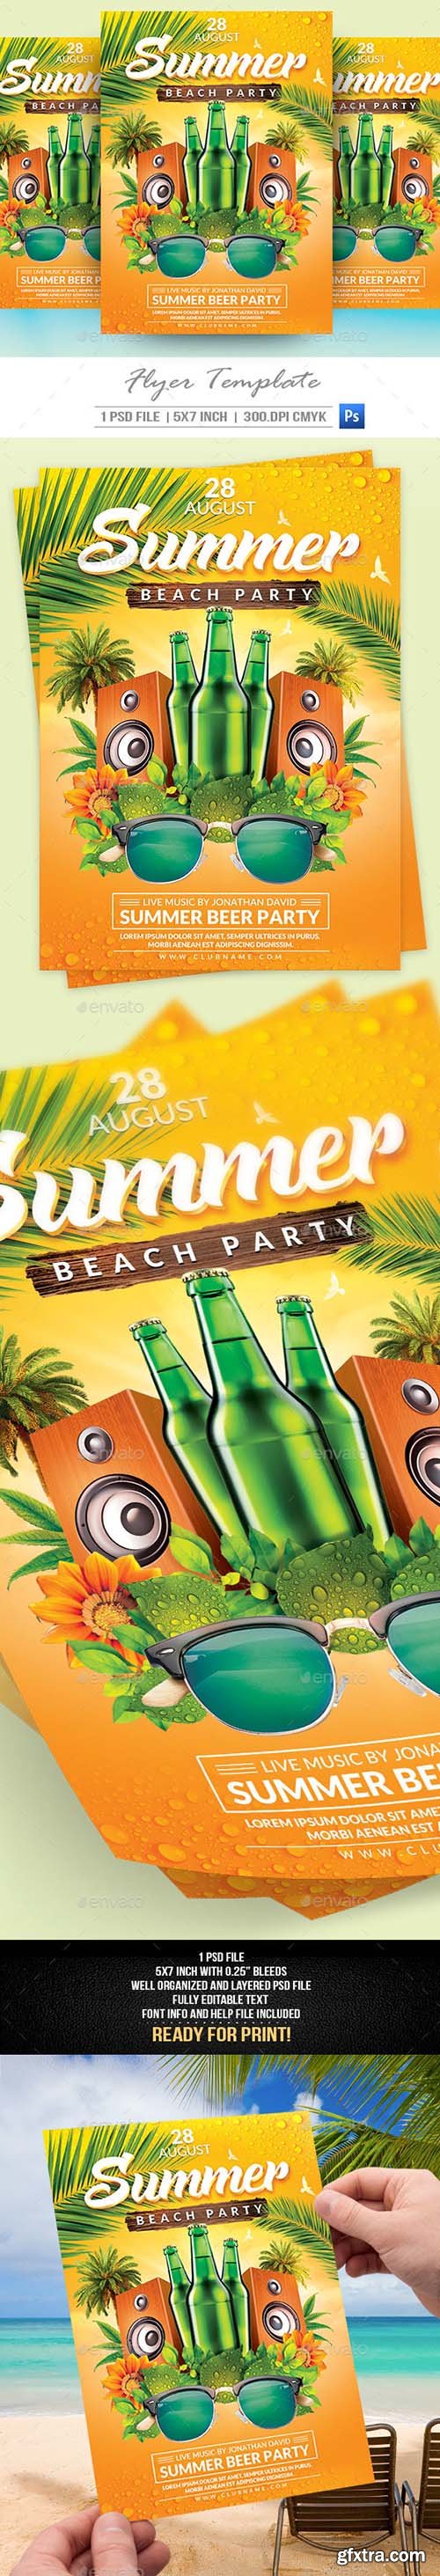 Graphicriver Summer Party Flyer Template V2 20008309